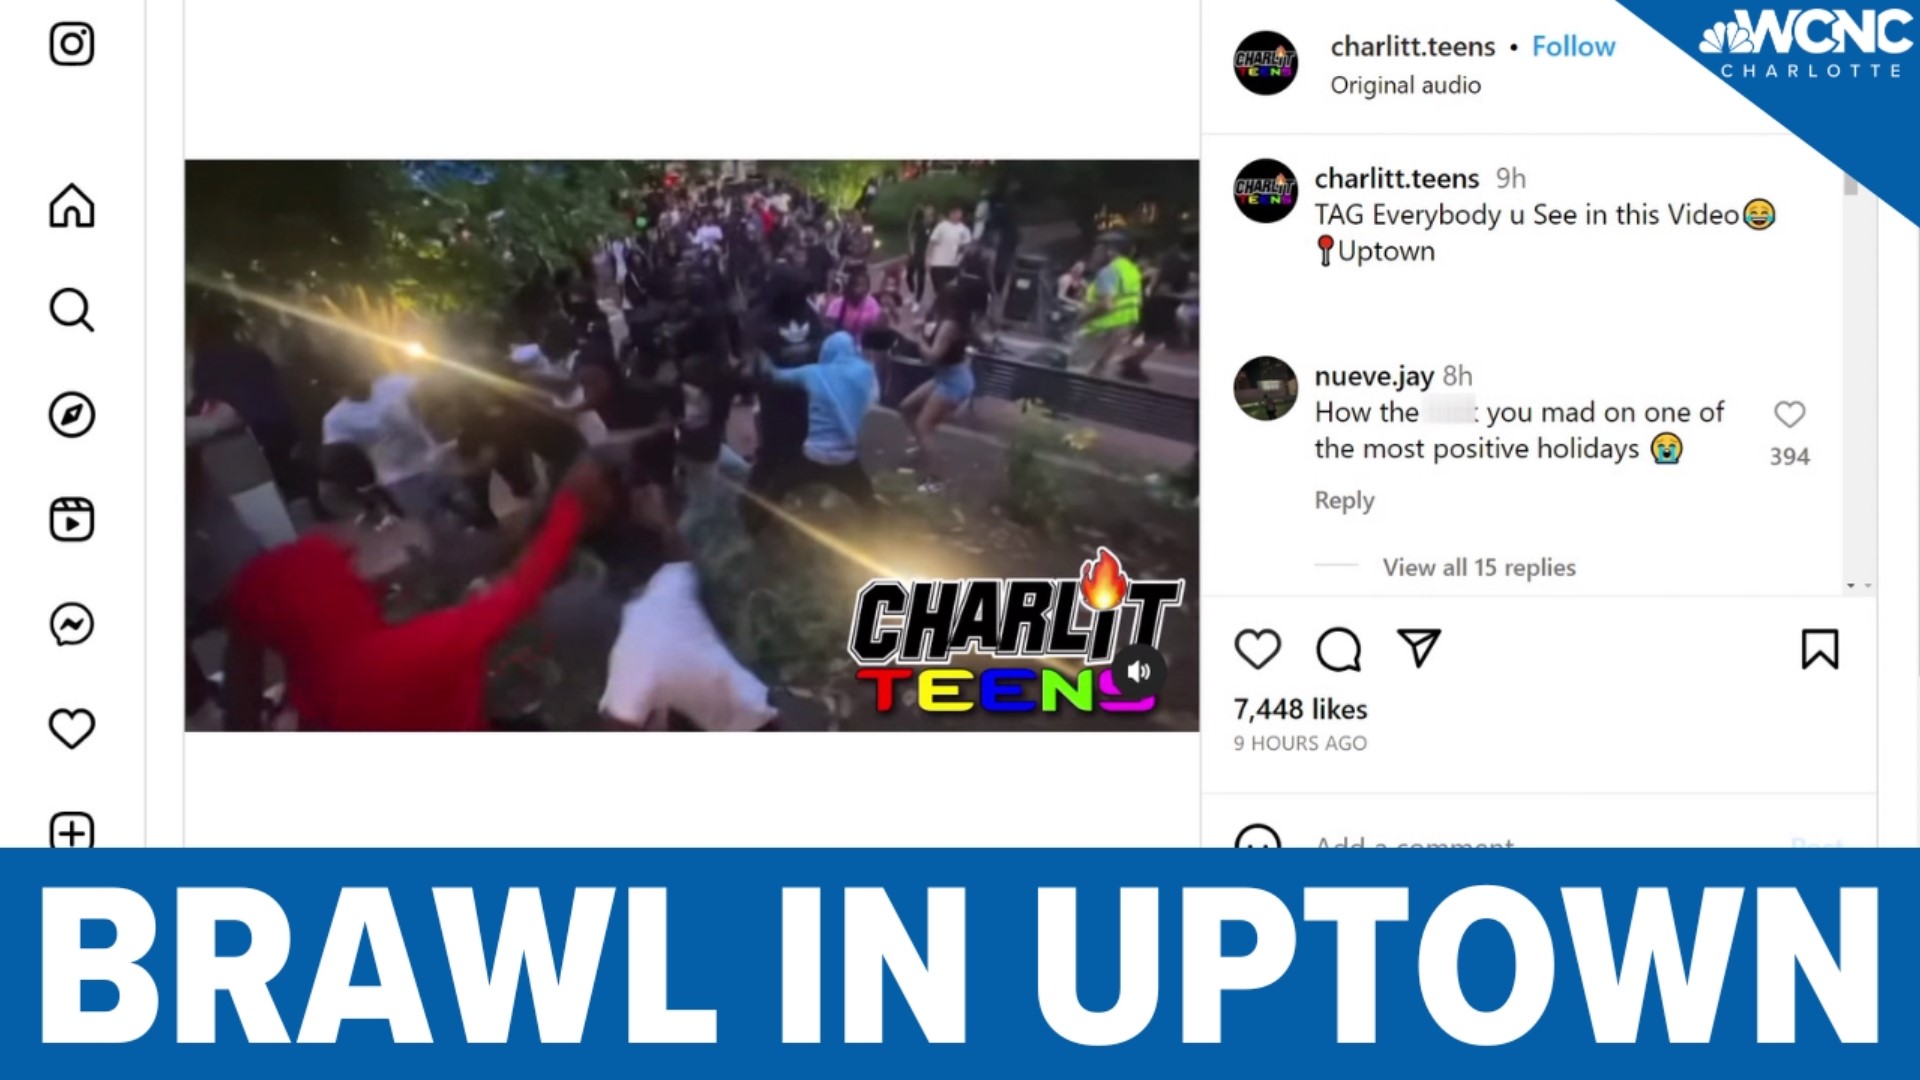 More than 30 people were arrested or cited after a huge brawl broke out at a Fourth of July celebration at Romare Bearden Park in Uptown, police announced Wednesday.